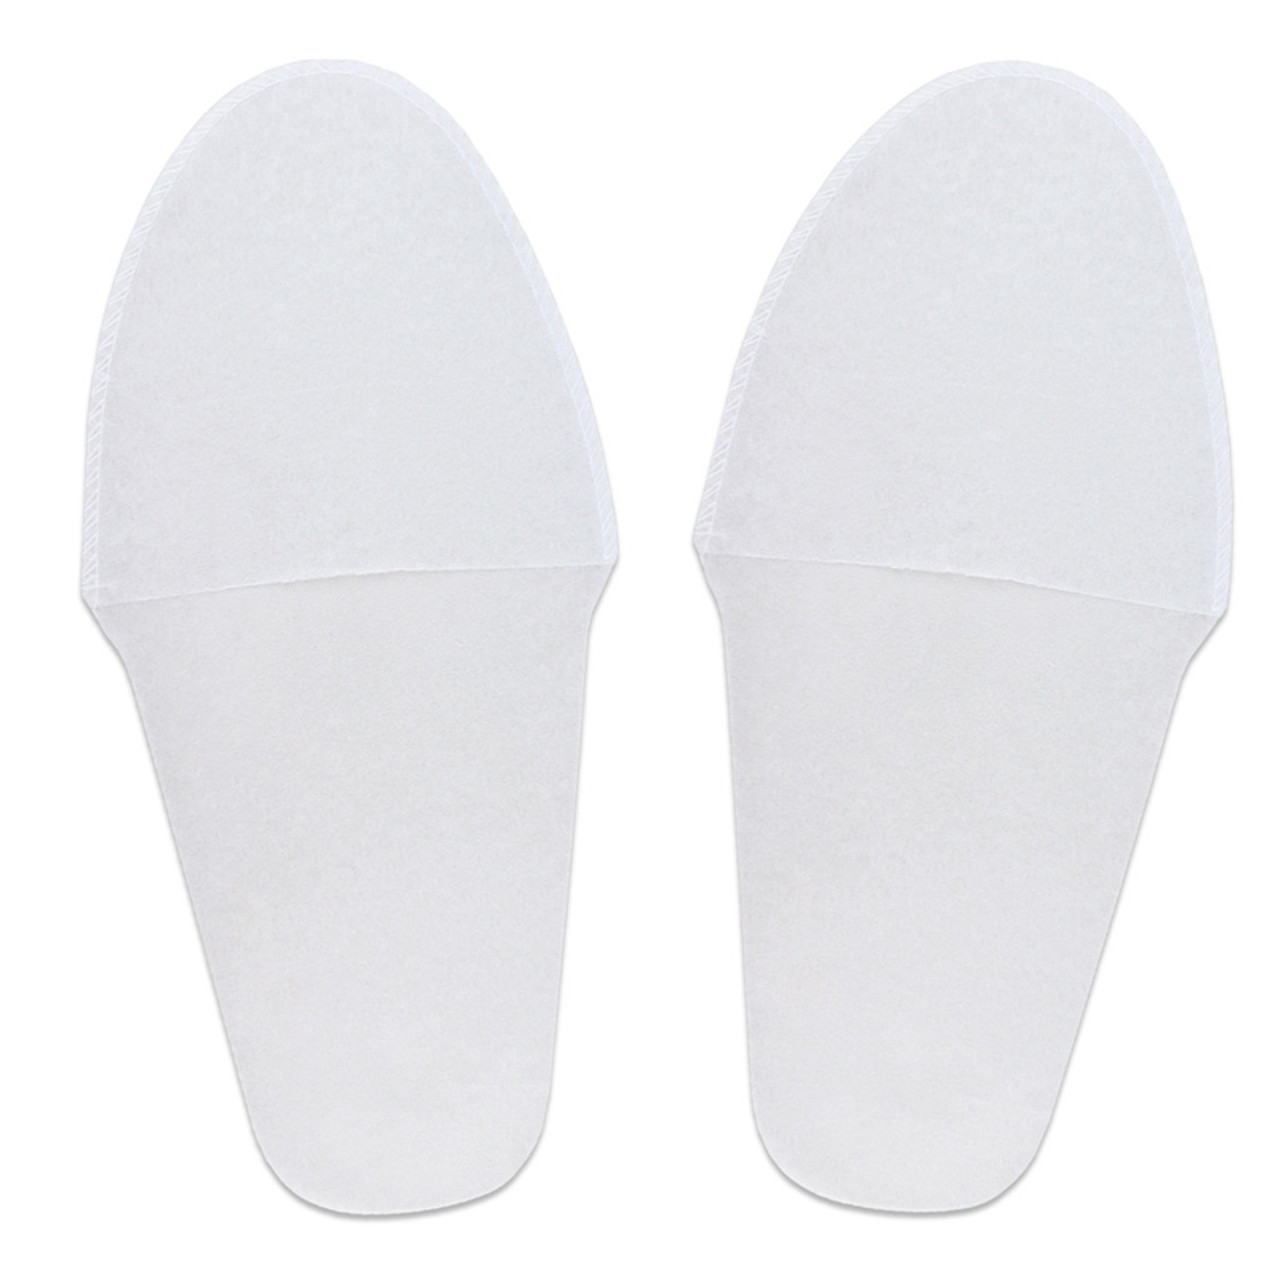 Professional Disposable Pedicure Slippers (25 pair)